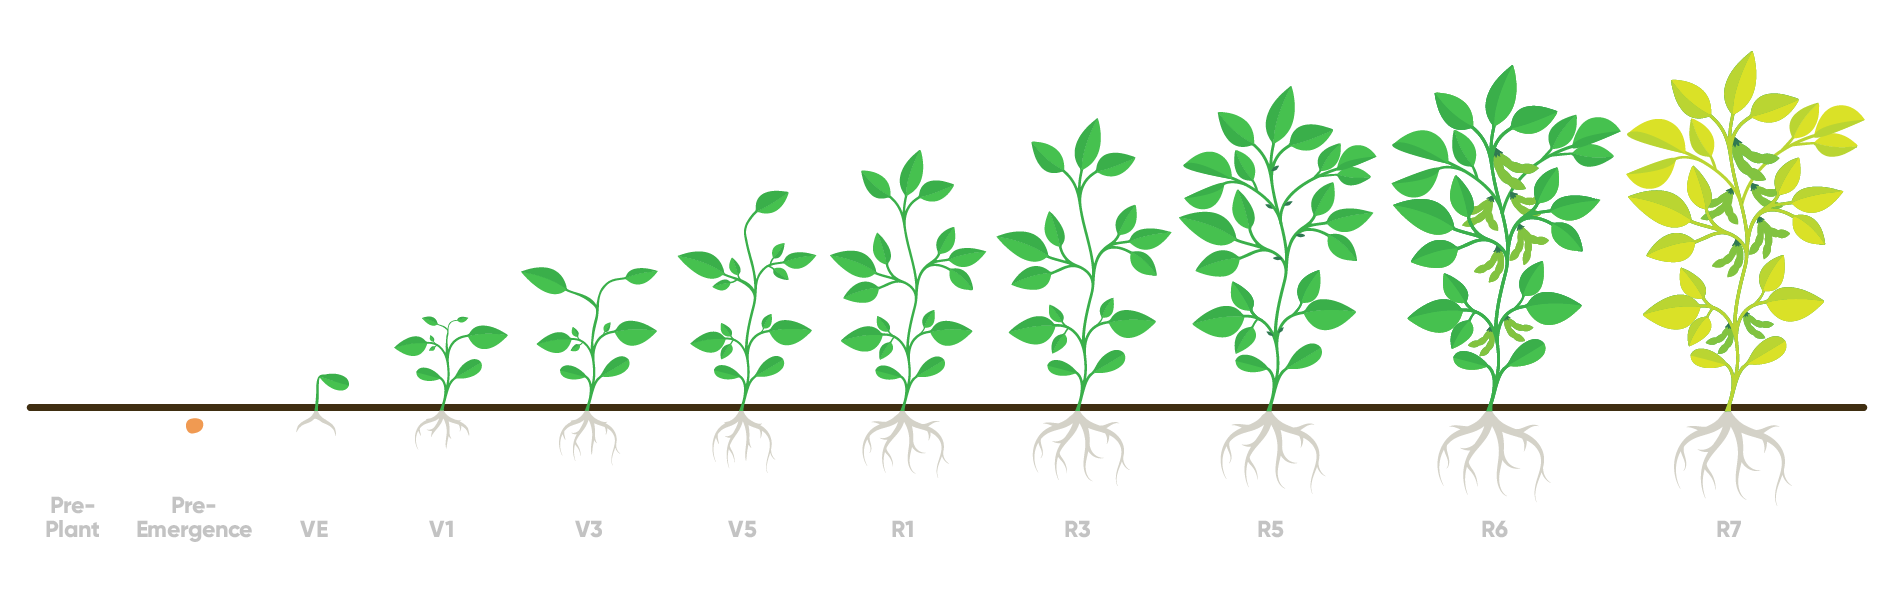 soybean stages